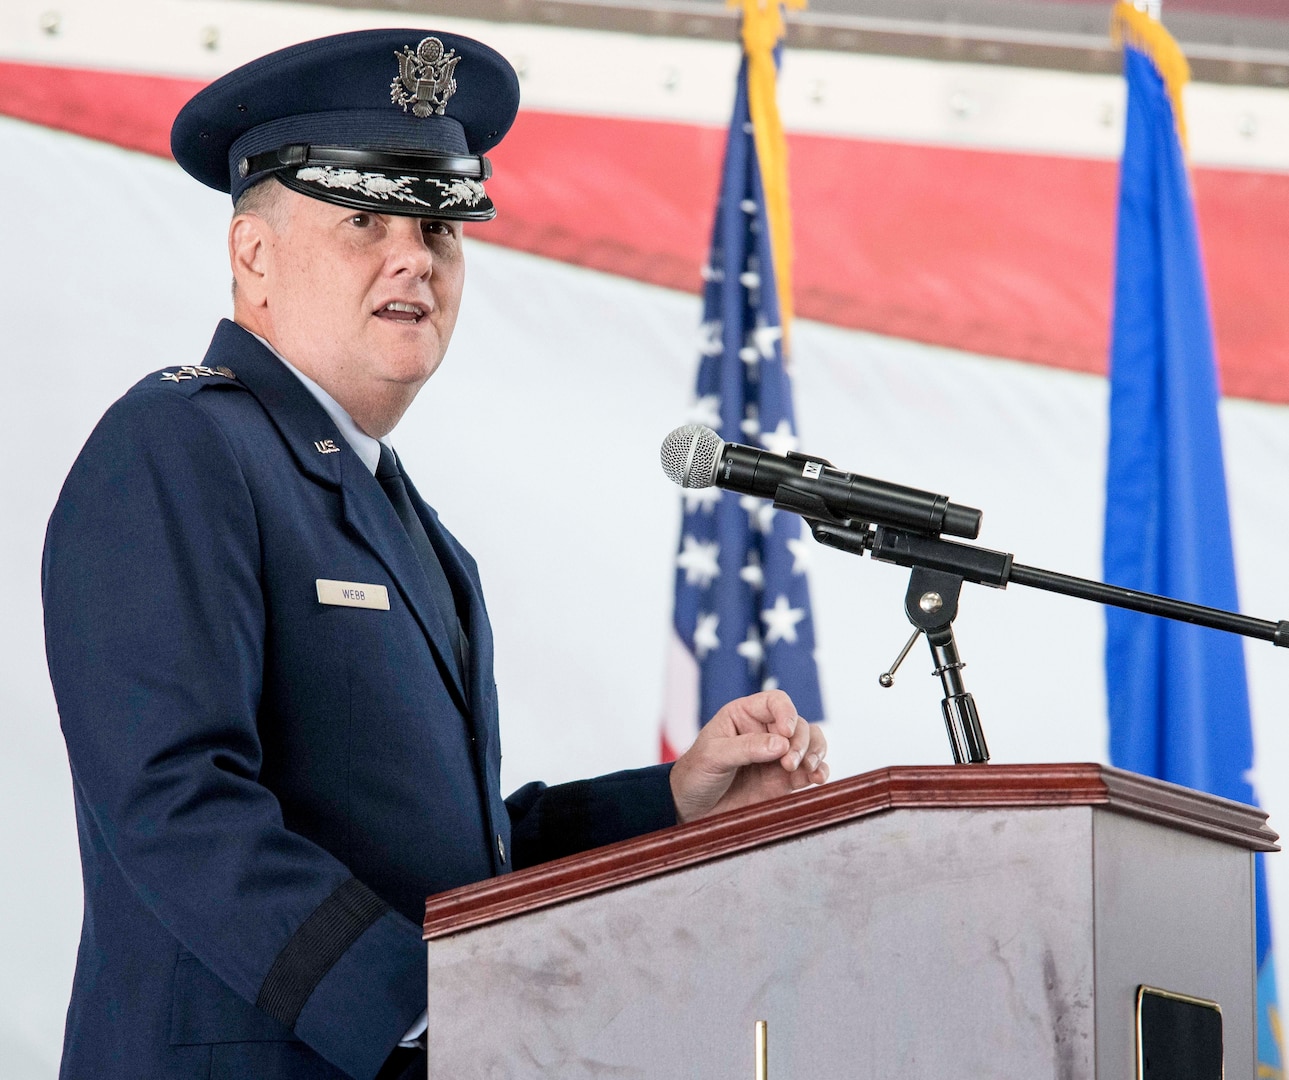 U.S. Air Force Lt. Gen. Brad Webb, commander of Air Education and Training Command, speaks after taking command of AETC during a change of command ceremony at Joint Base San Antonio-Randolph July 26. Webb is the 34th commander of AETC, which includes Air Force Recruiting Service, two numbered air forces and Air University. More than 293,000 students are trained annually and AETC’s members are about 60,000 strong and include active duty, Reserve, Guard, civilian and contractor personnel.